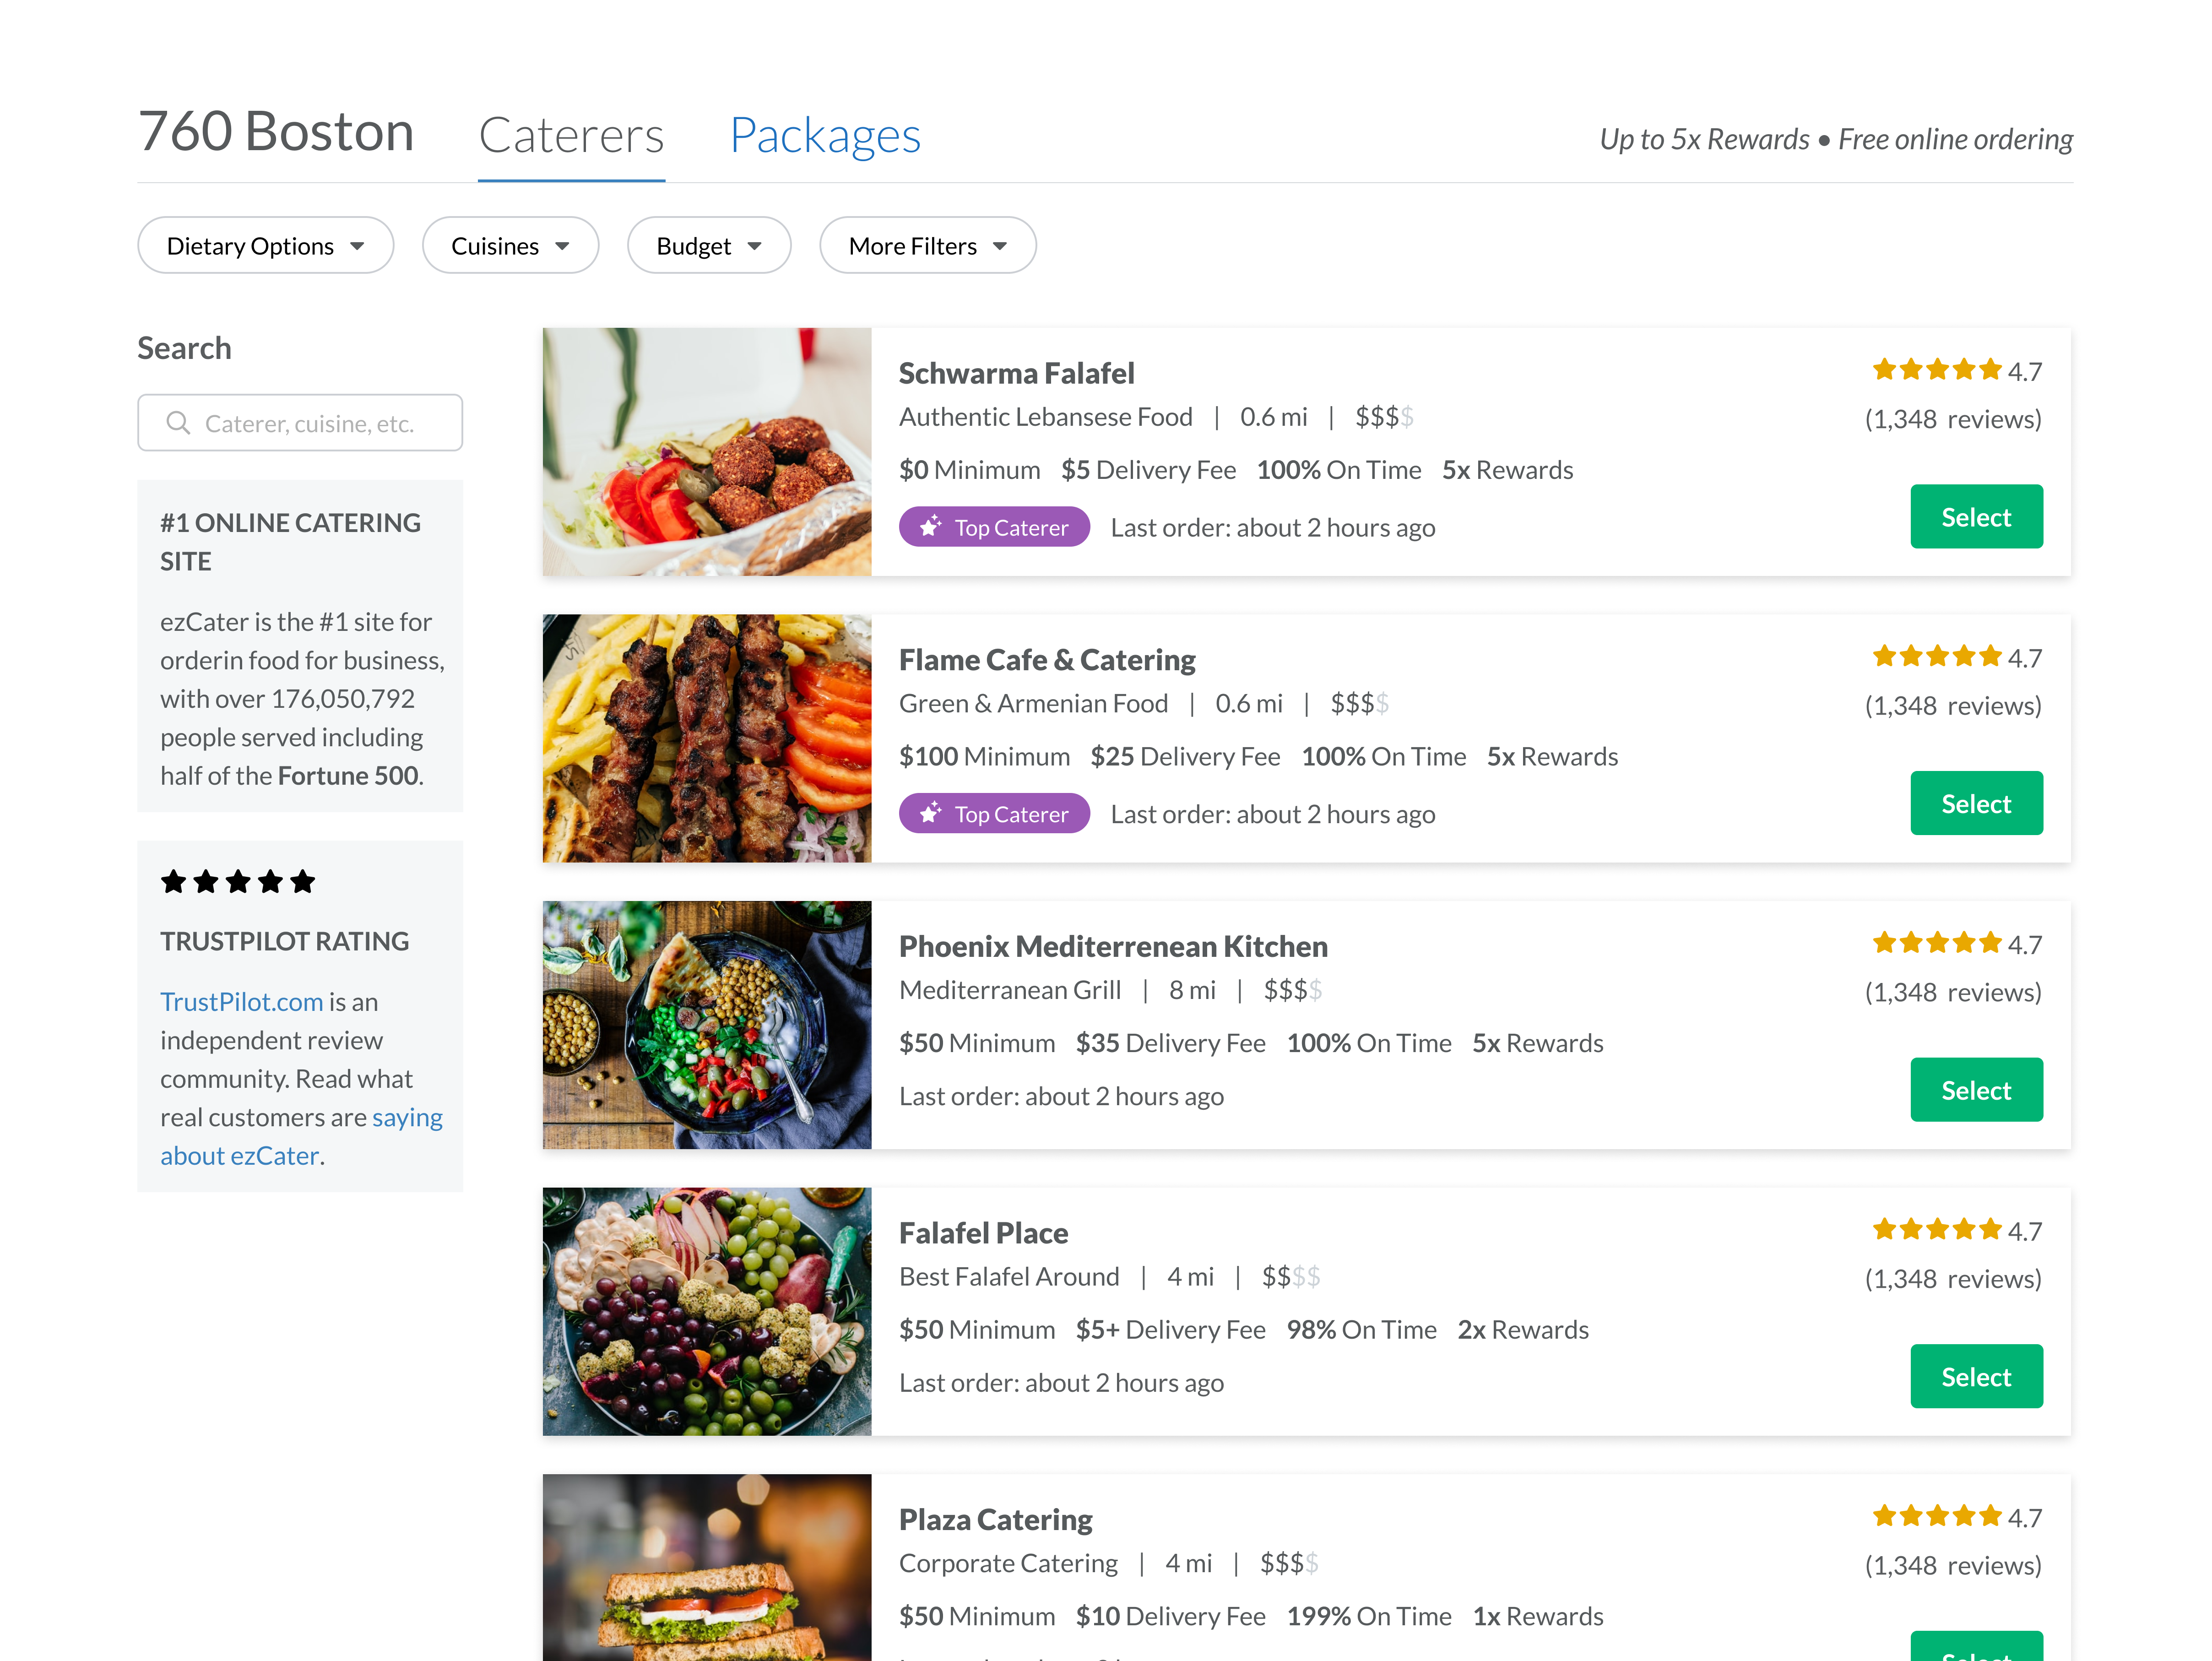 Top Caterers on the marketplace